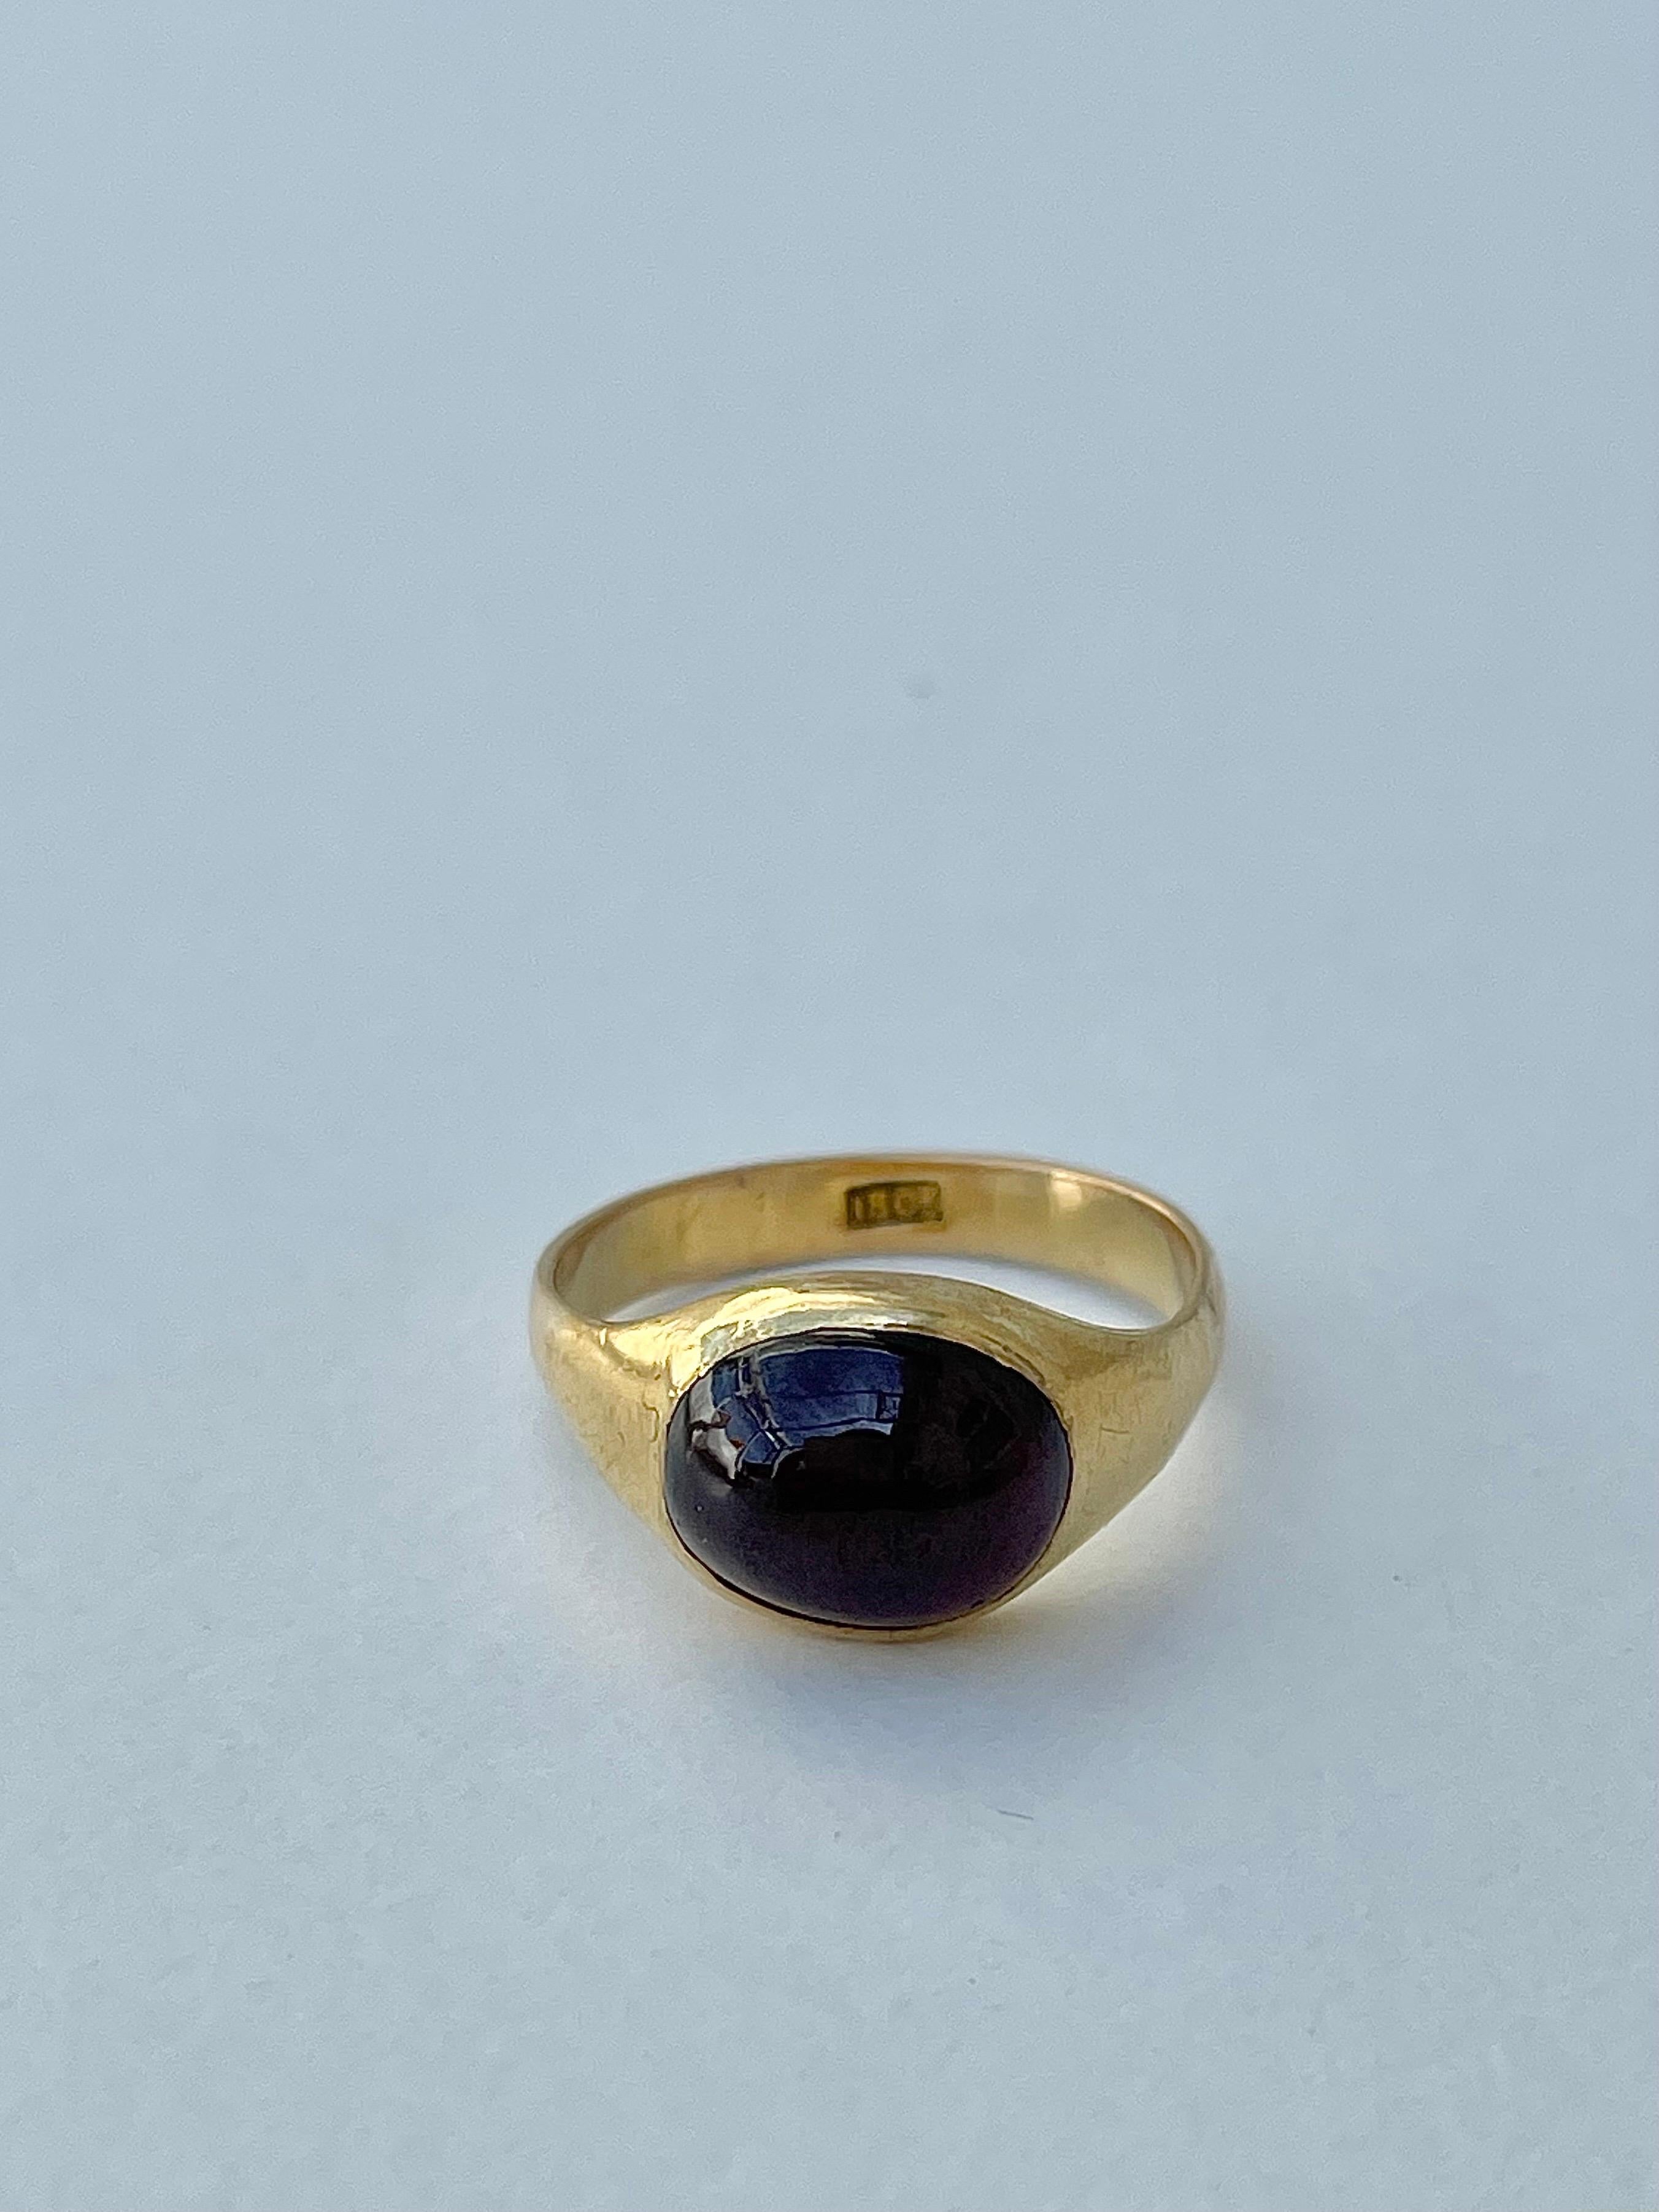 Antique Foiled Cabochon Garnet 18ct Yellow Gold Signet Ring

gorgeous victorian juicy red garnet stone

The item comes without the box in the photos but will be presented in a  gift box

Measurements: weight 4.16g, size UK M, head of ring 10.3mm x